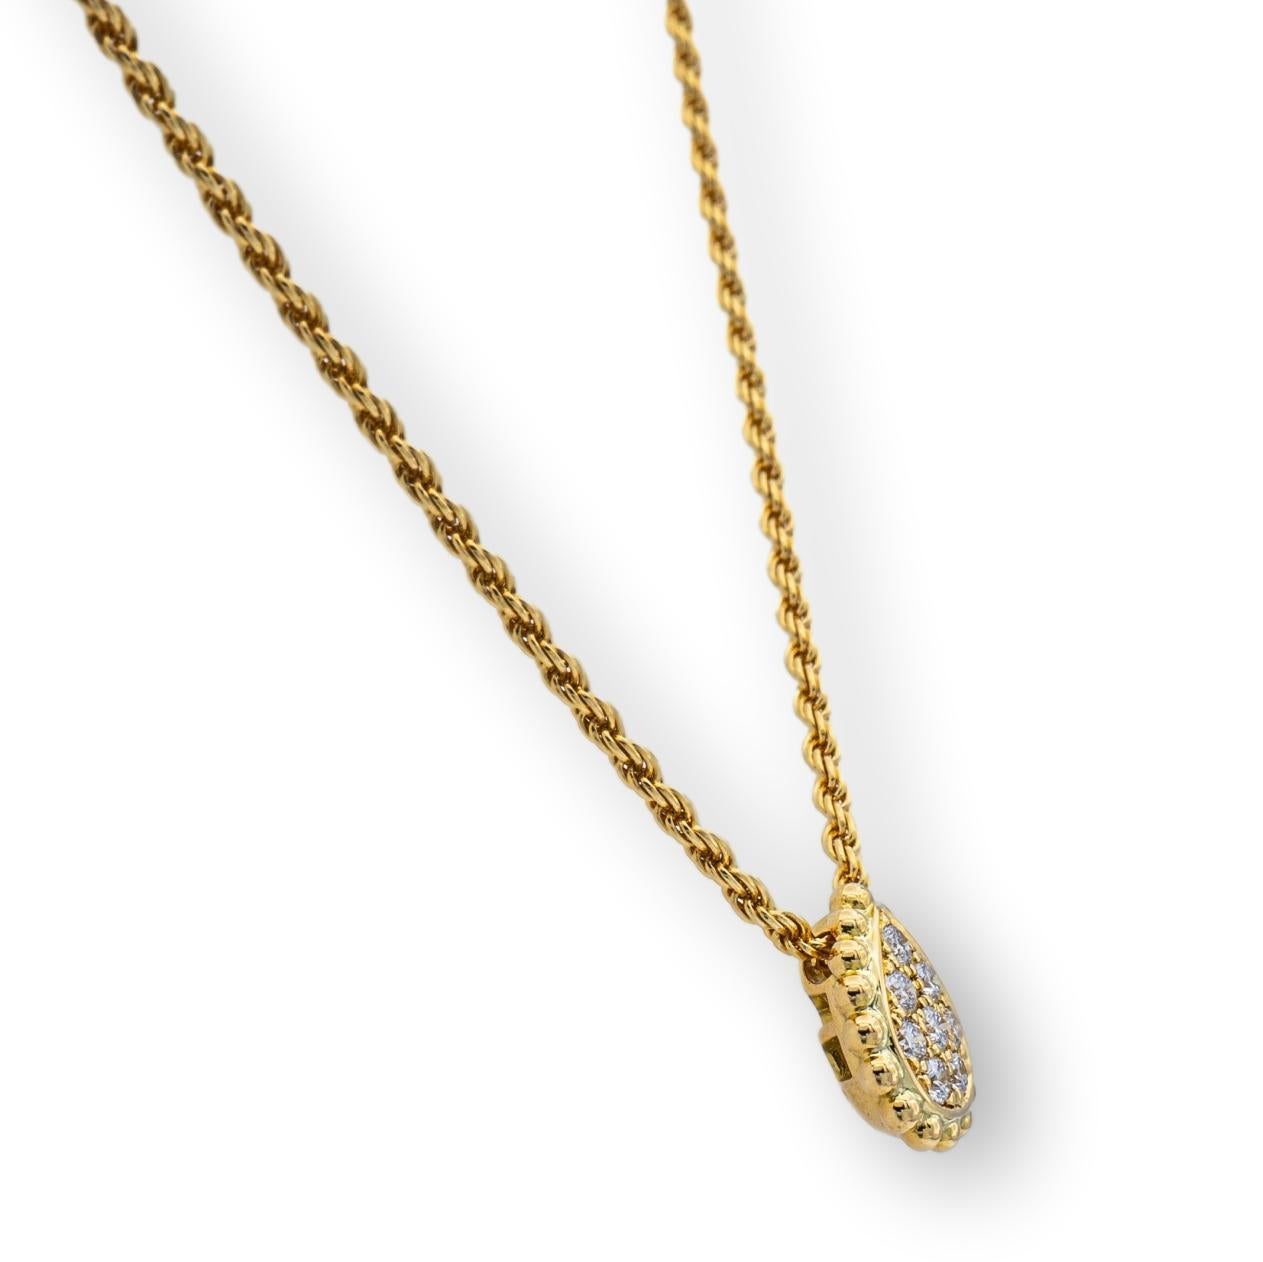 Boucheron pendant from the Serpent Boheme collection finely crafted in 18 Karat Rose Gold featuring a pear shape pendant studded with pave set round brilliant cut diamonds weighing .13 carats total weight hanging off a rope necklace with a lobster